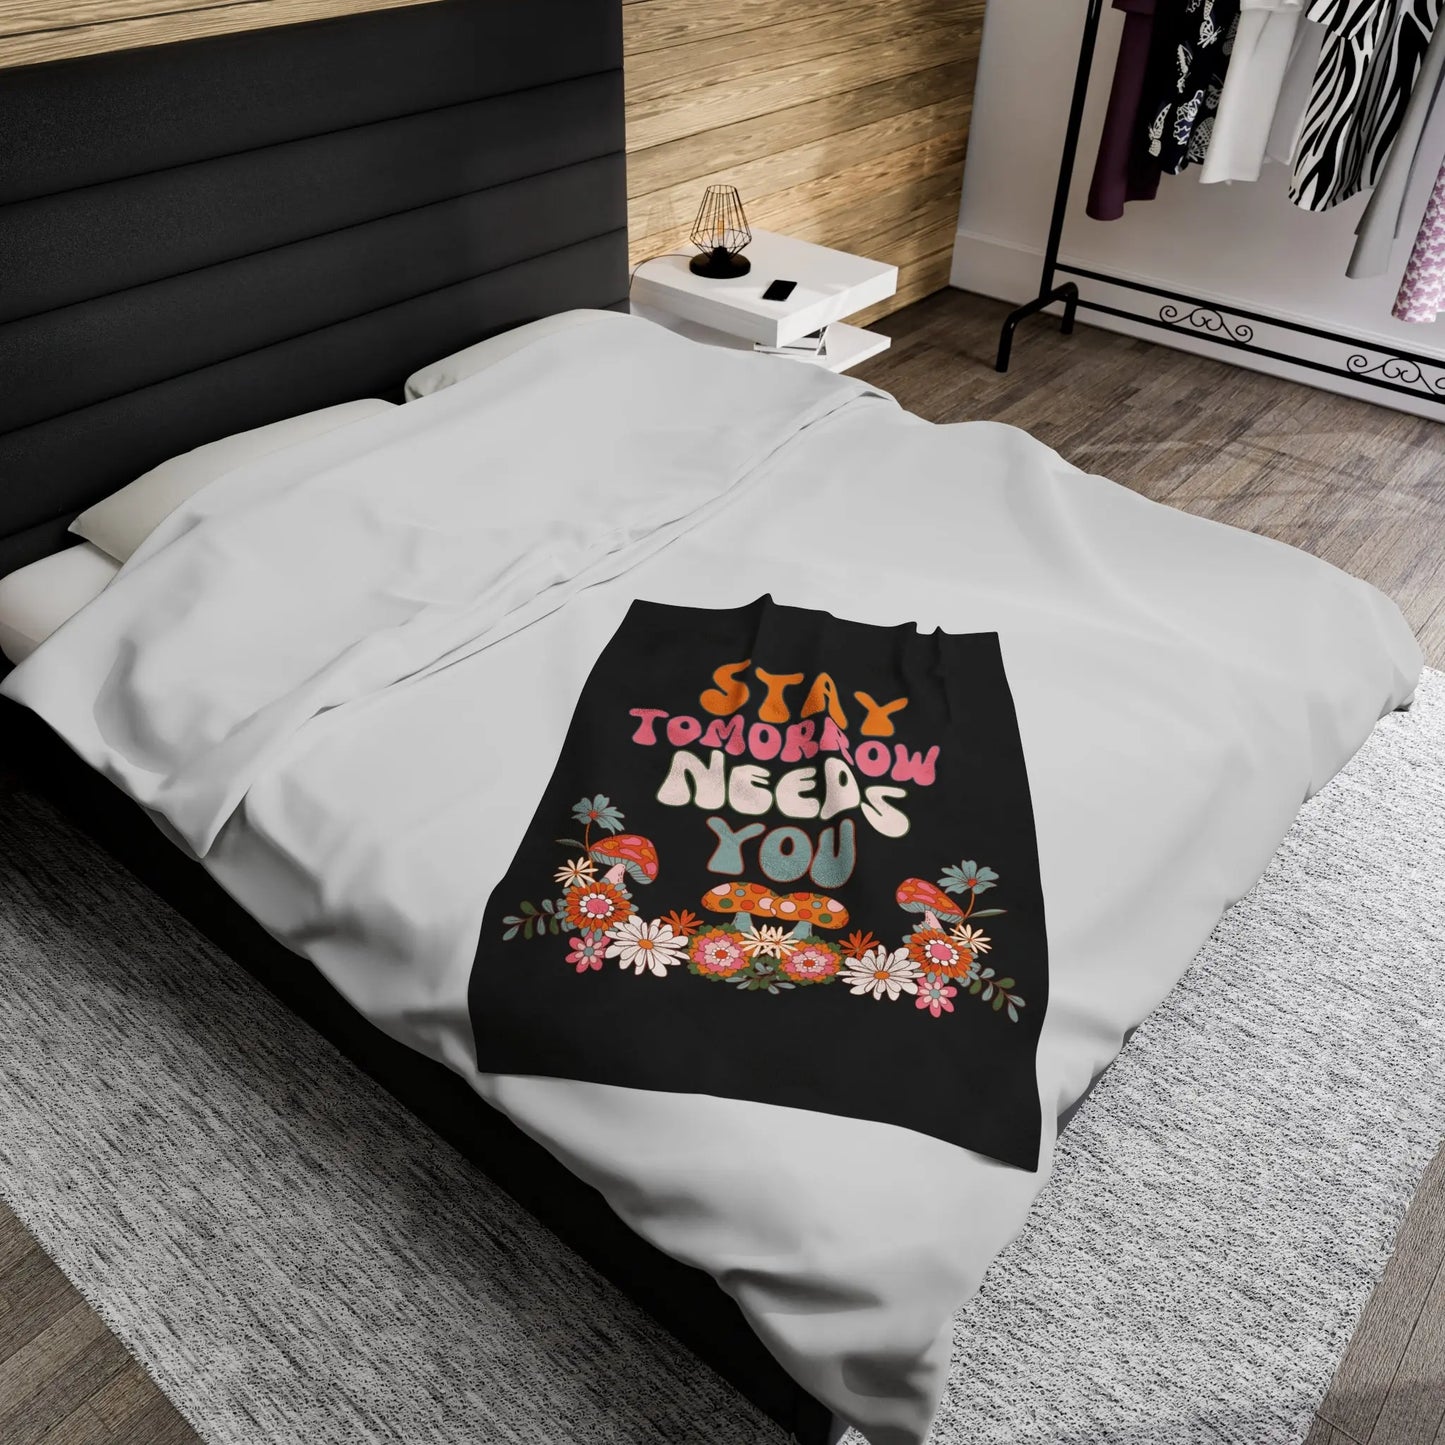 Hippie Retro Suicide Awareness Stay Tomorrow Needs You Lap Blanket - Perfect for Mother's Day and spring! Wrap in comfort and spread awareness. Shop now